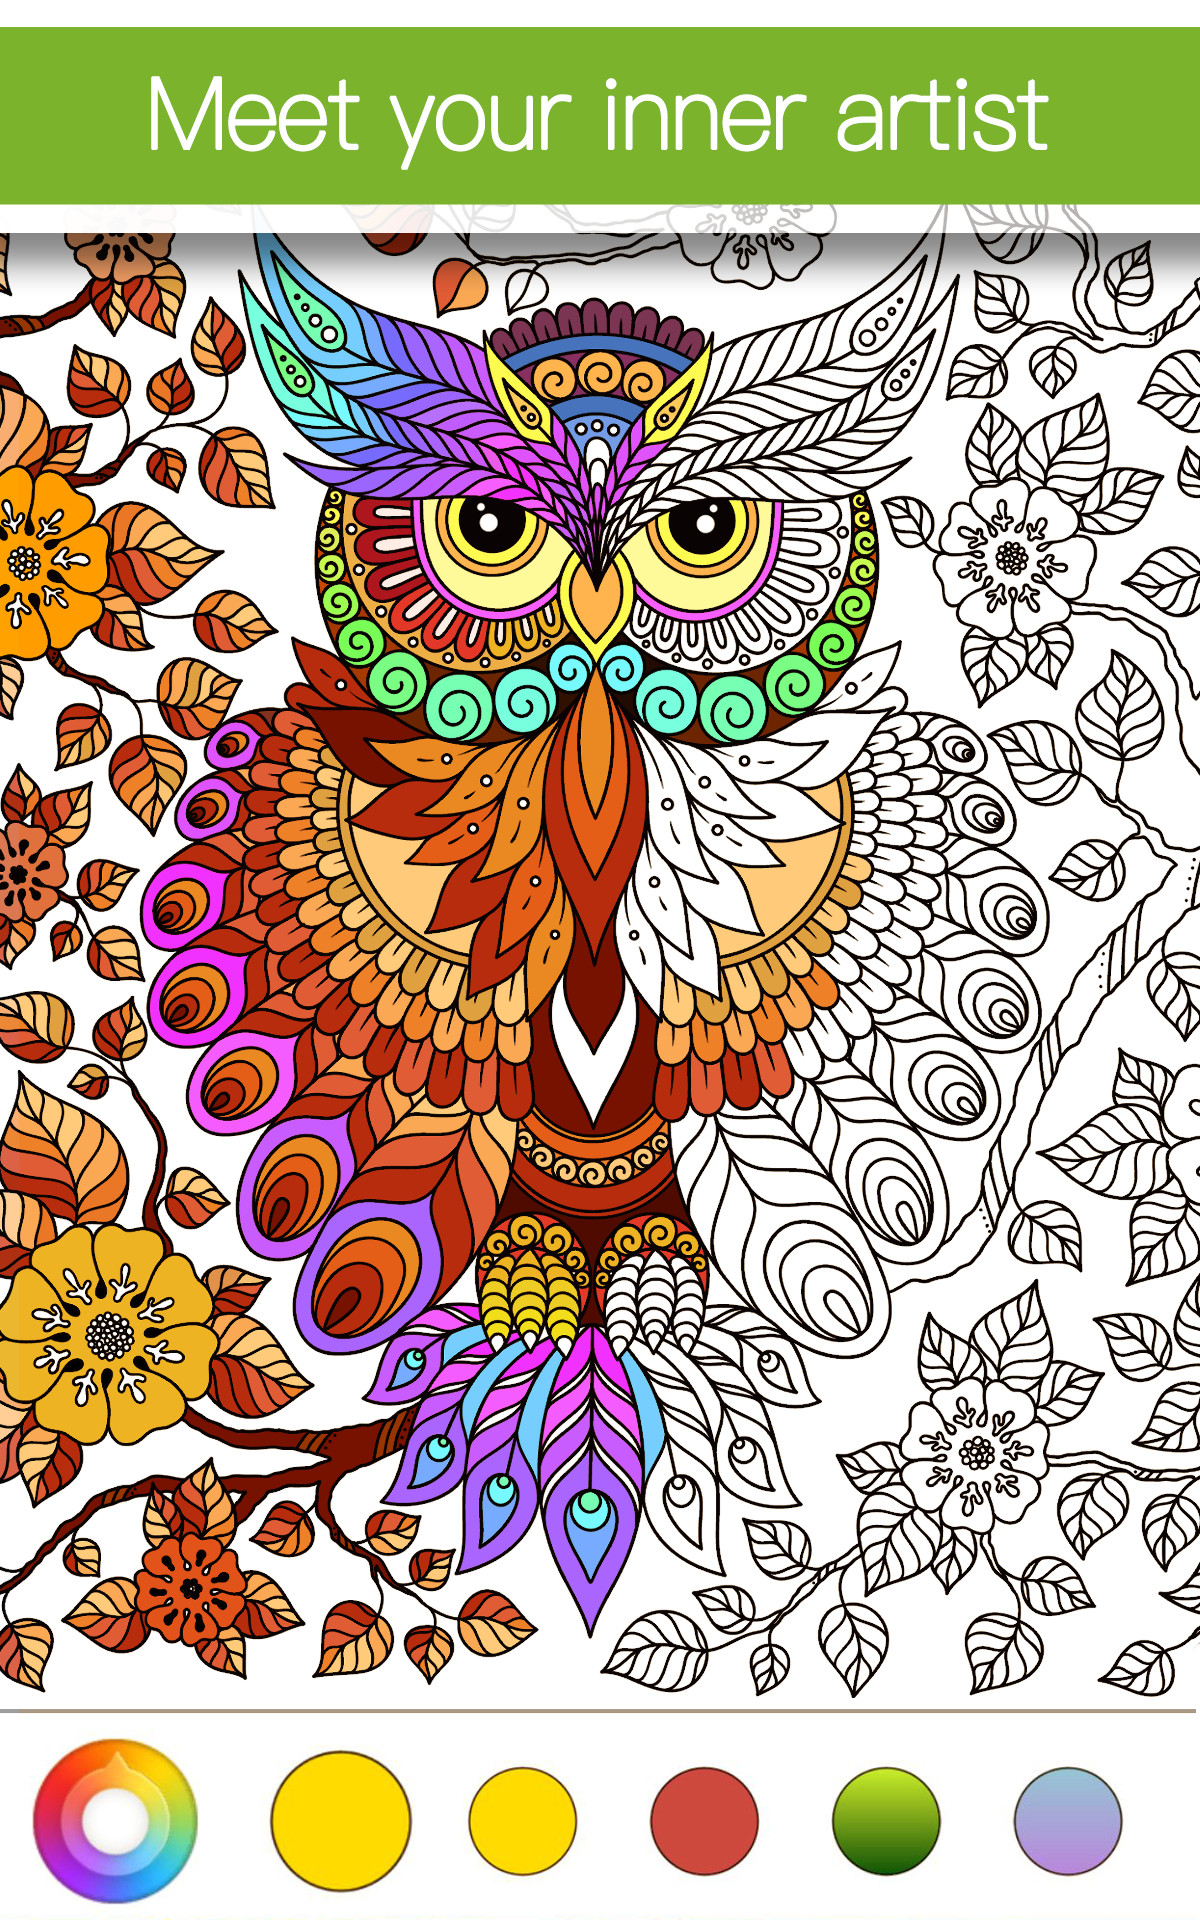 Coloring Book App For Adults Android
 Amazon Coloring Apps for Adults Premium Appstore for